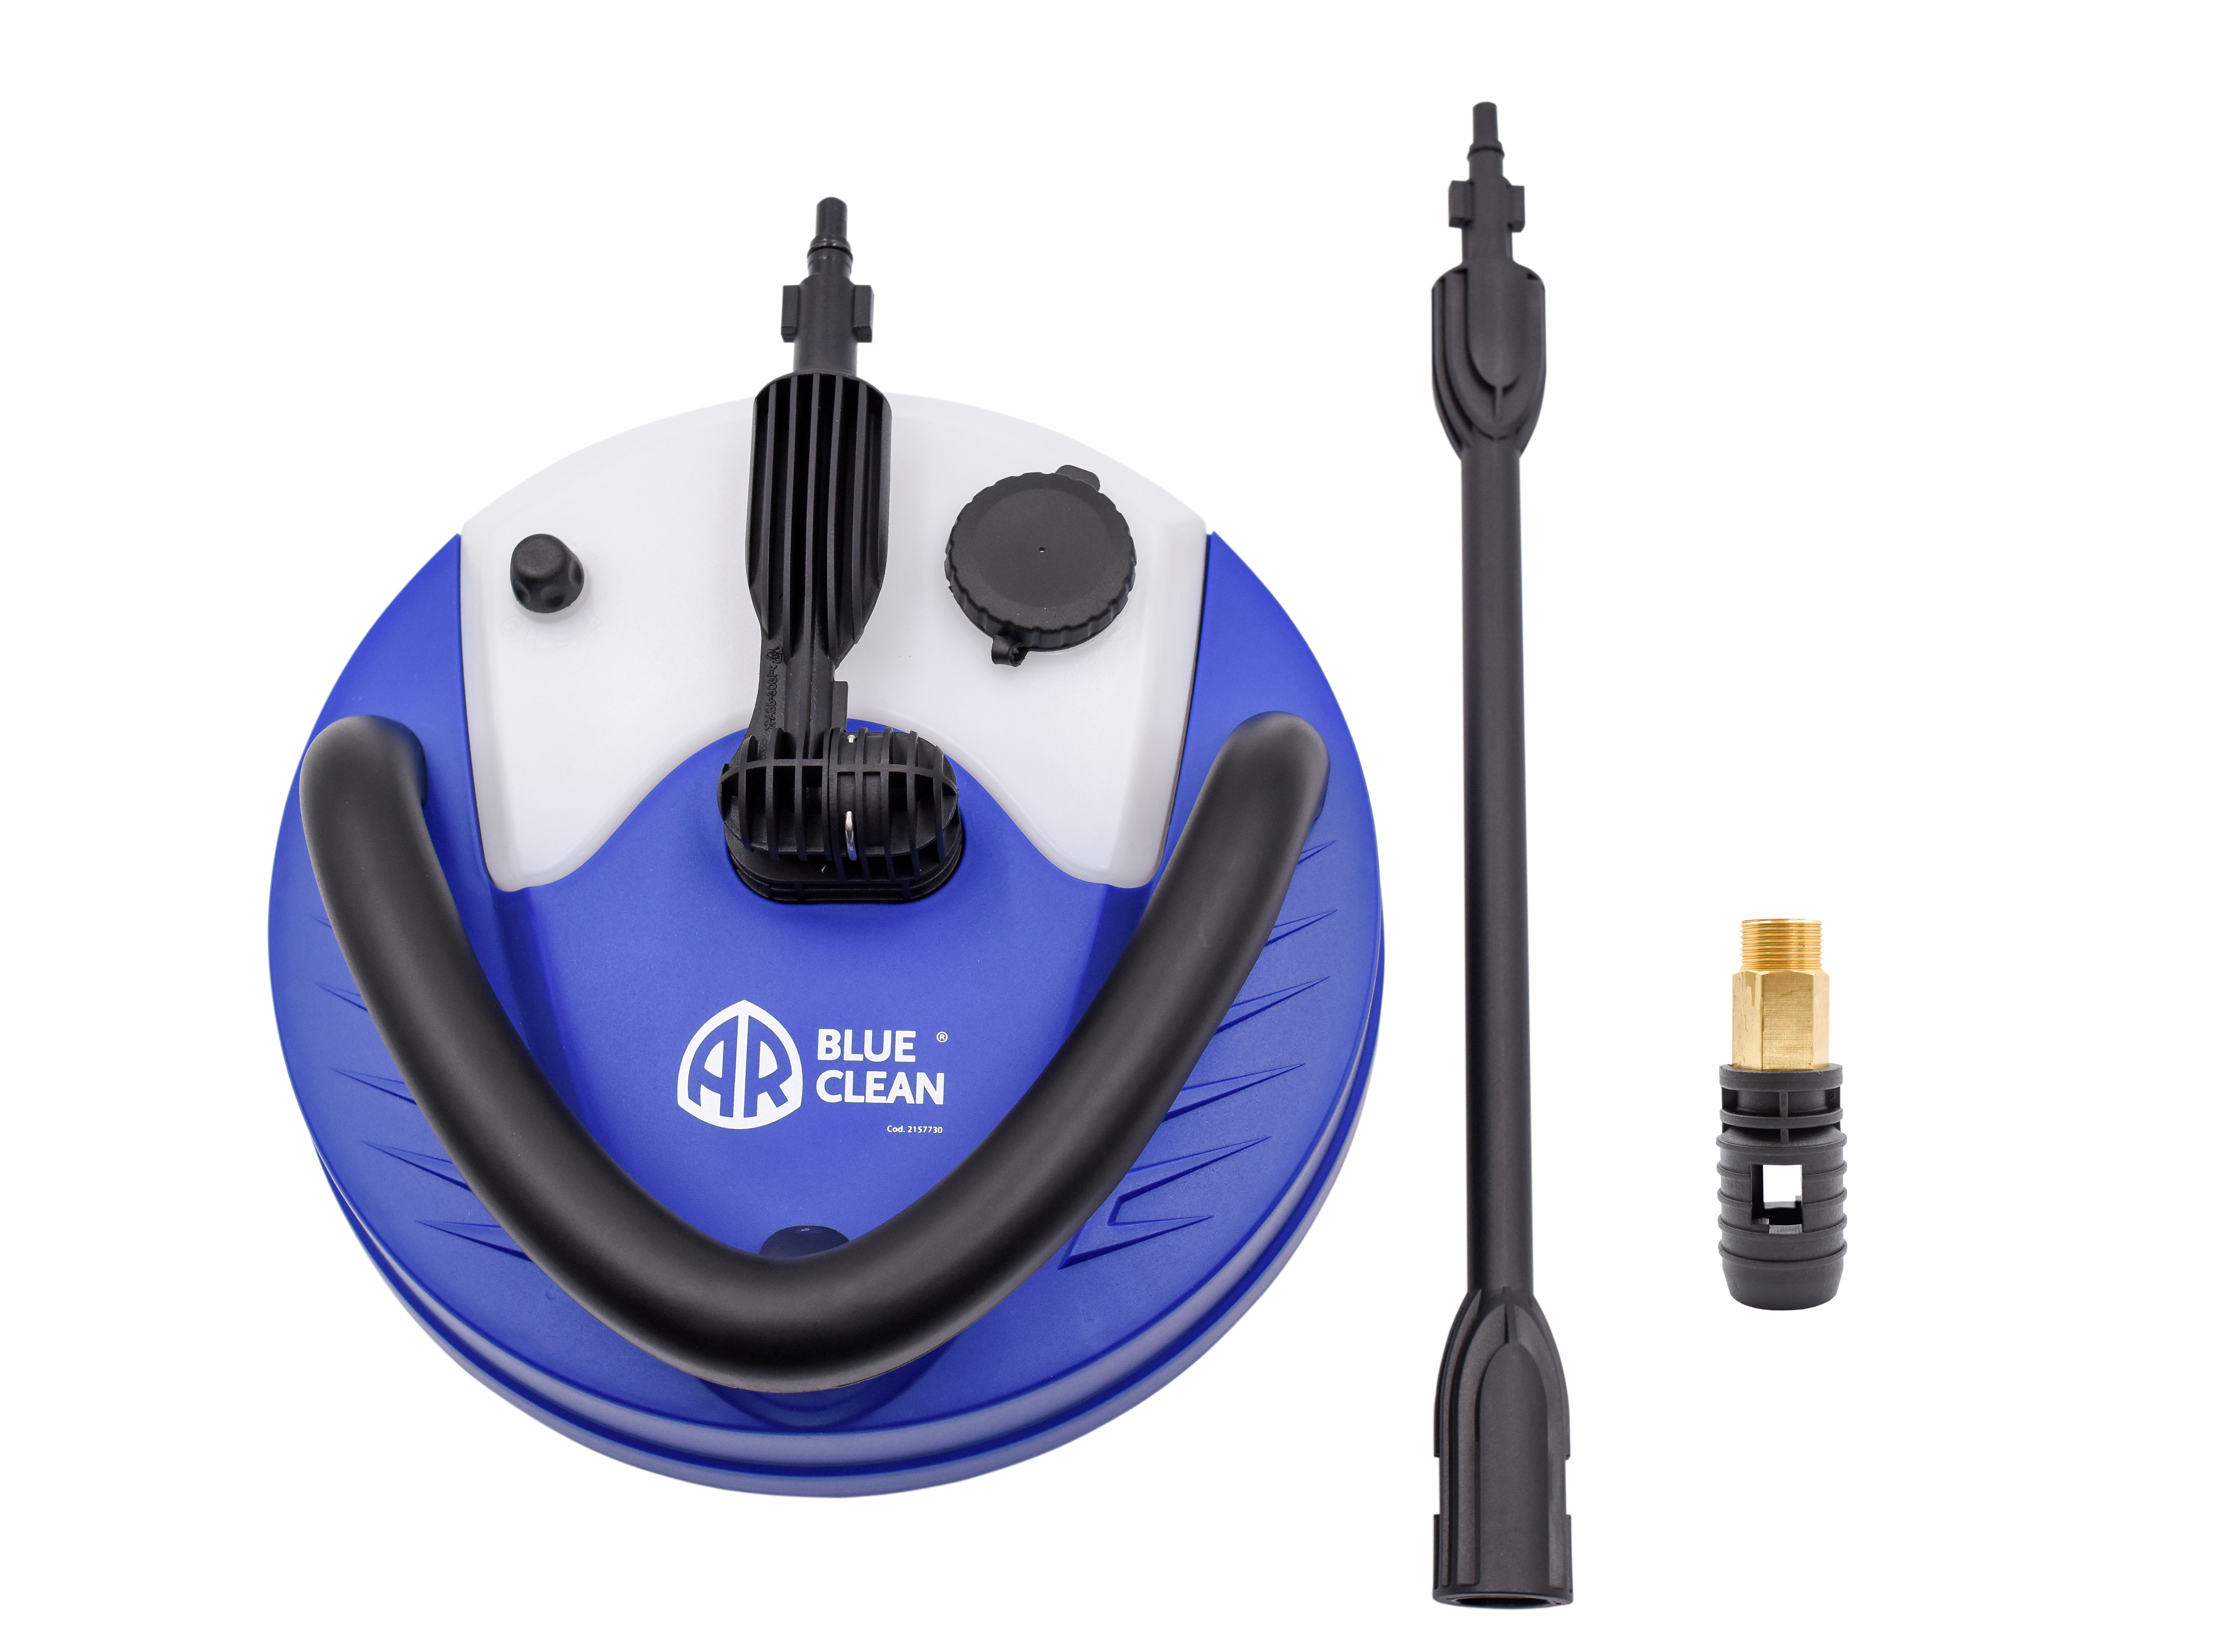 AR Blue Clean PW41581, 12" Surface Cleaner, Patio Cleaner with Integrated Detergent Tank Questions & Answers